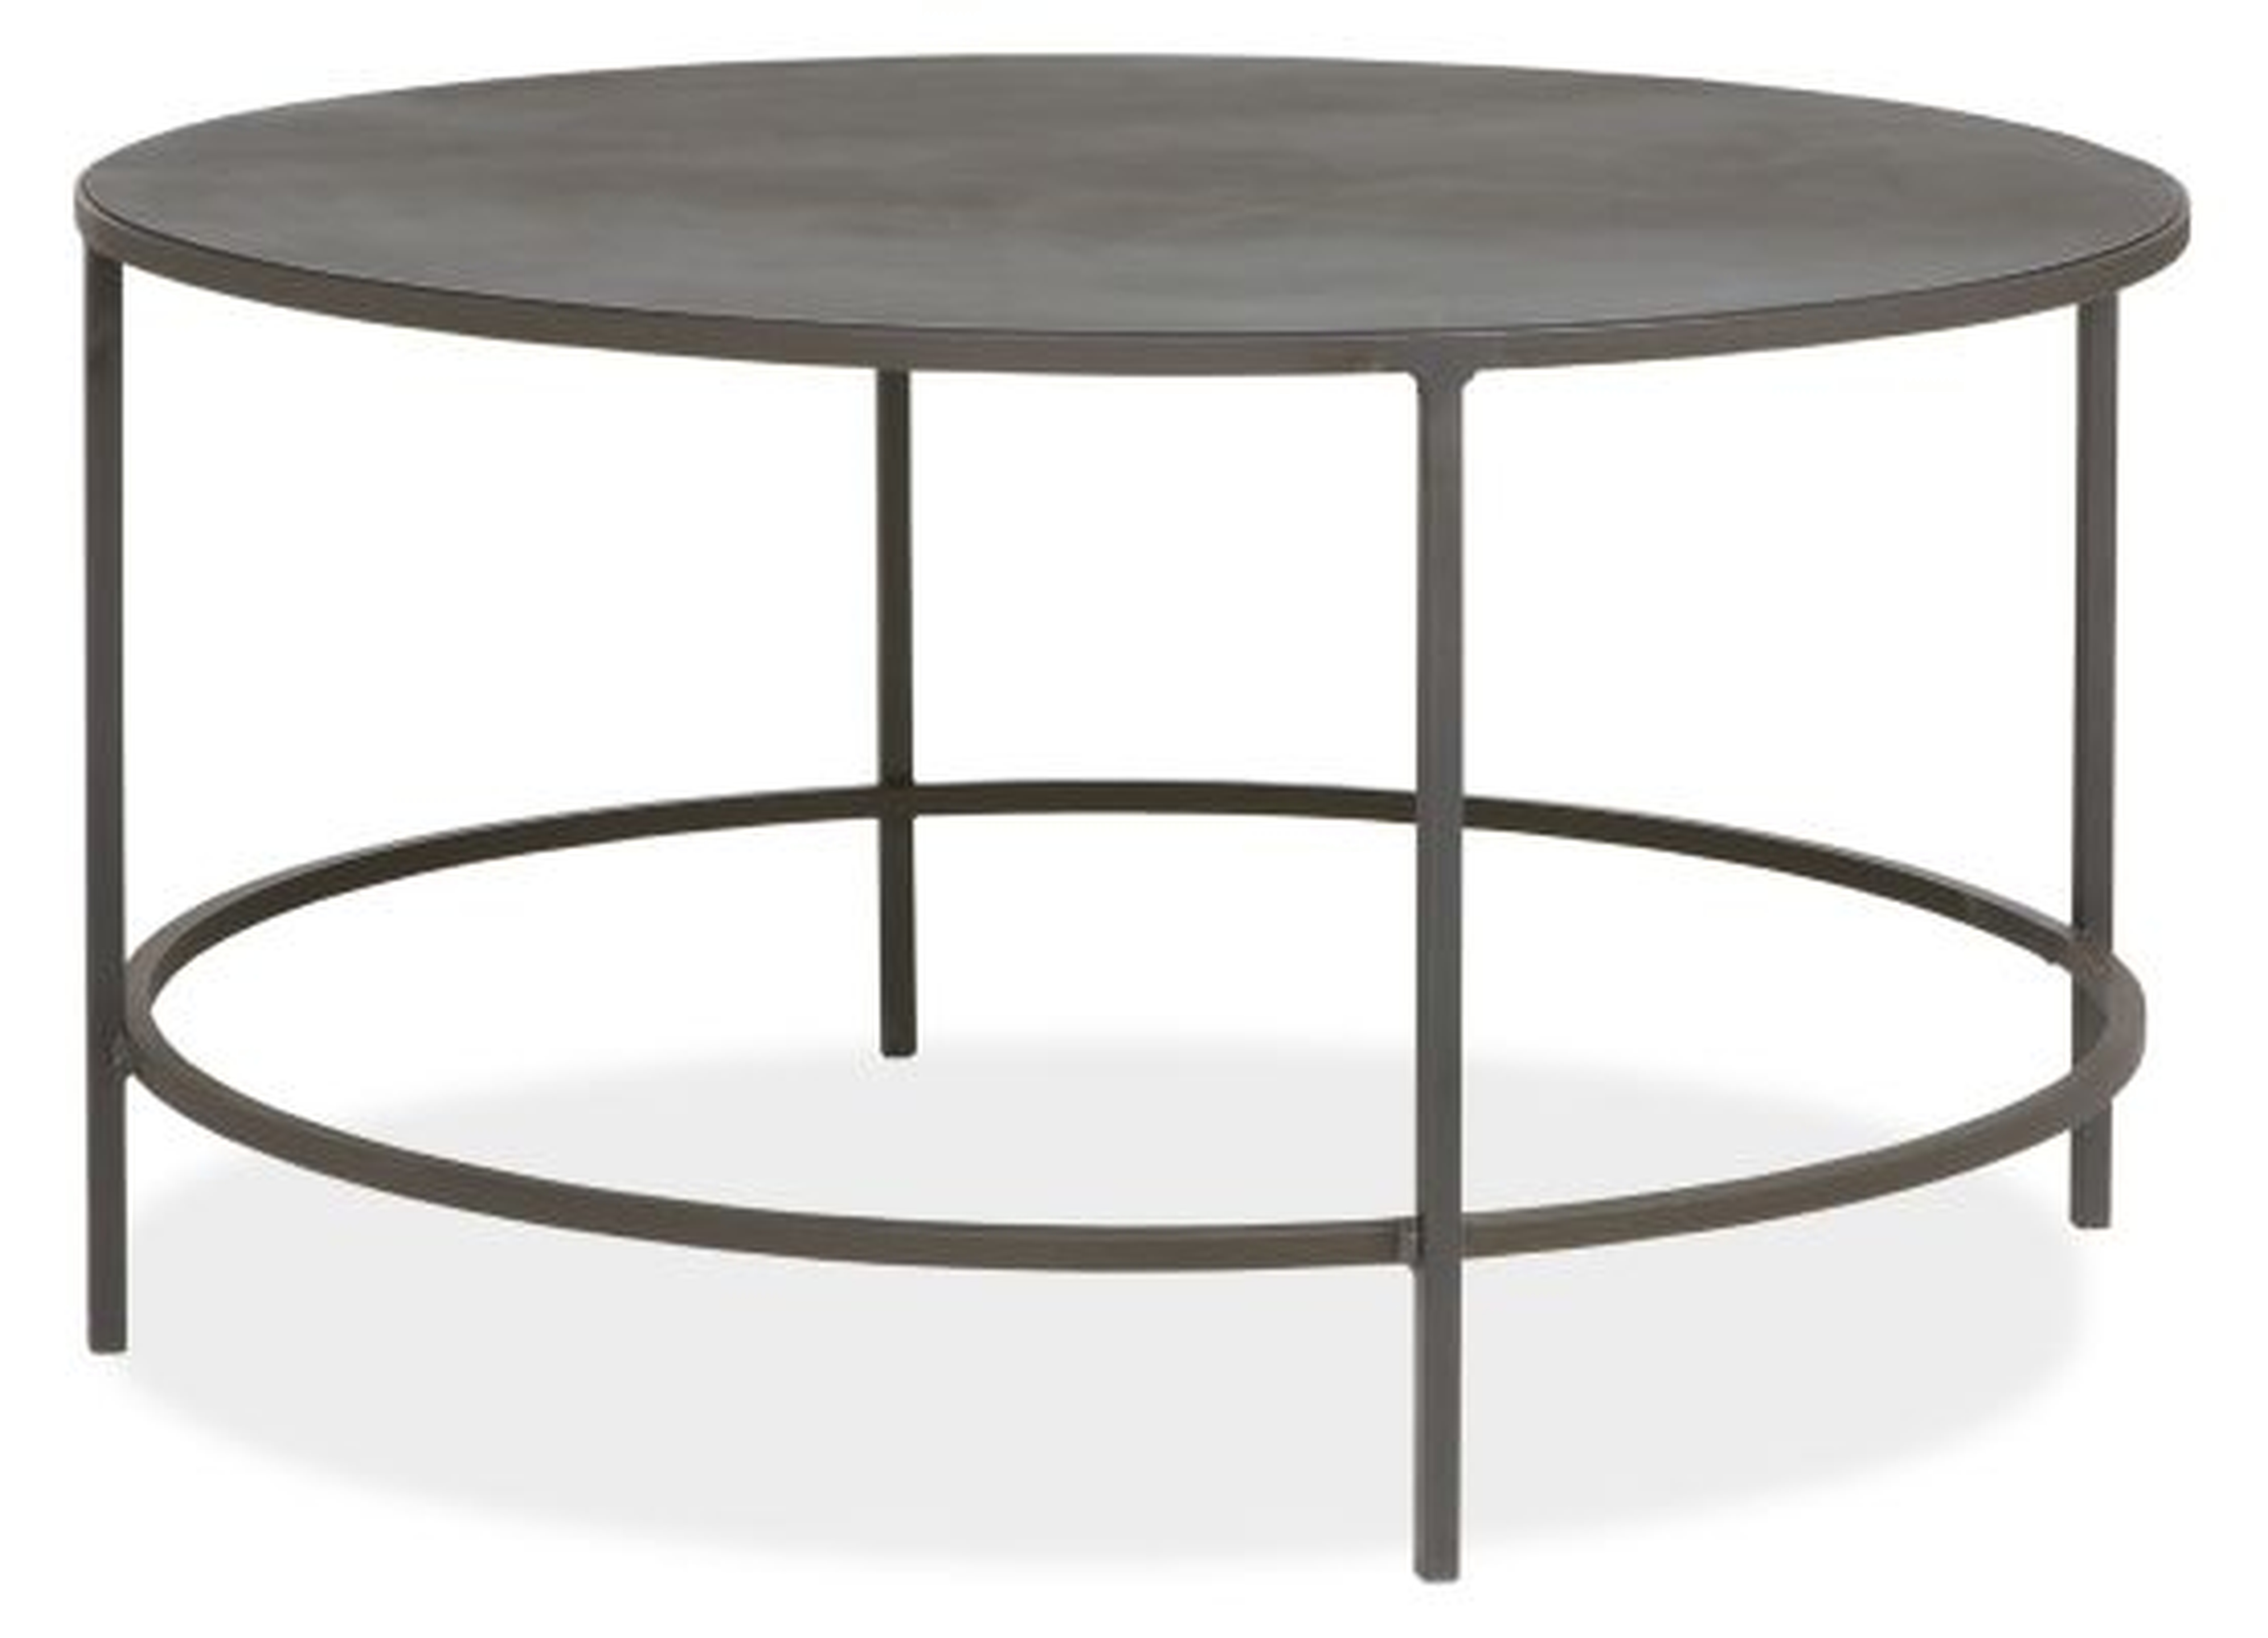 Slim Round Cocktail Table in Natural Steel - Room & Board